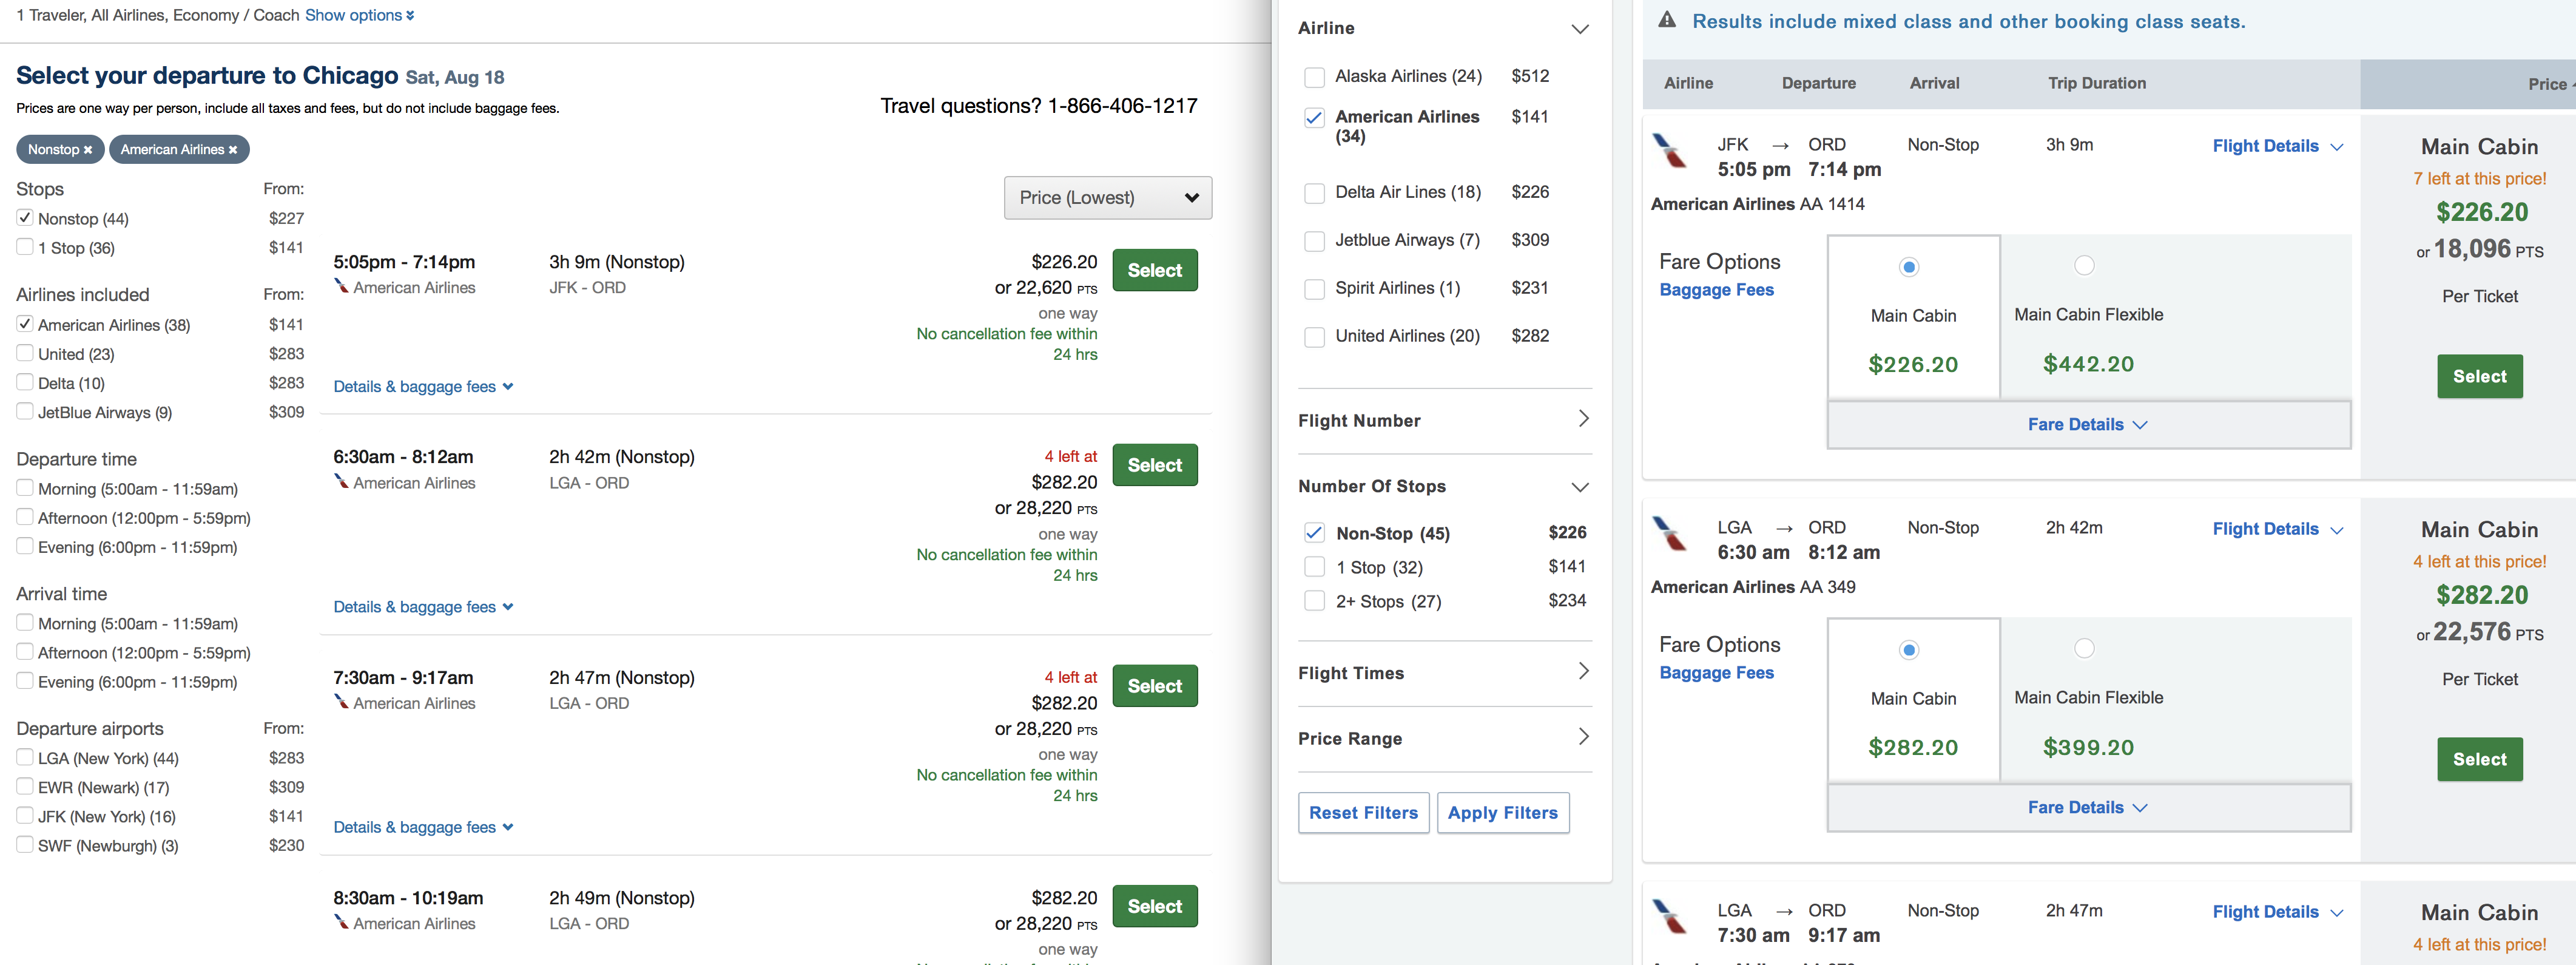 Expedia Takes Over Chase Ultimate Rewards Travel: Have Prices Gone Up?